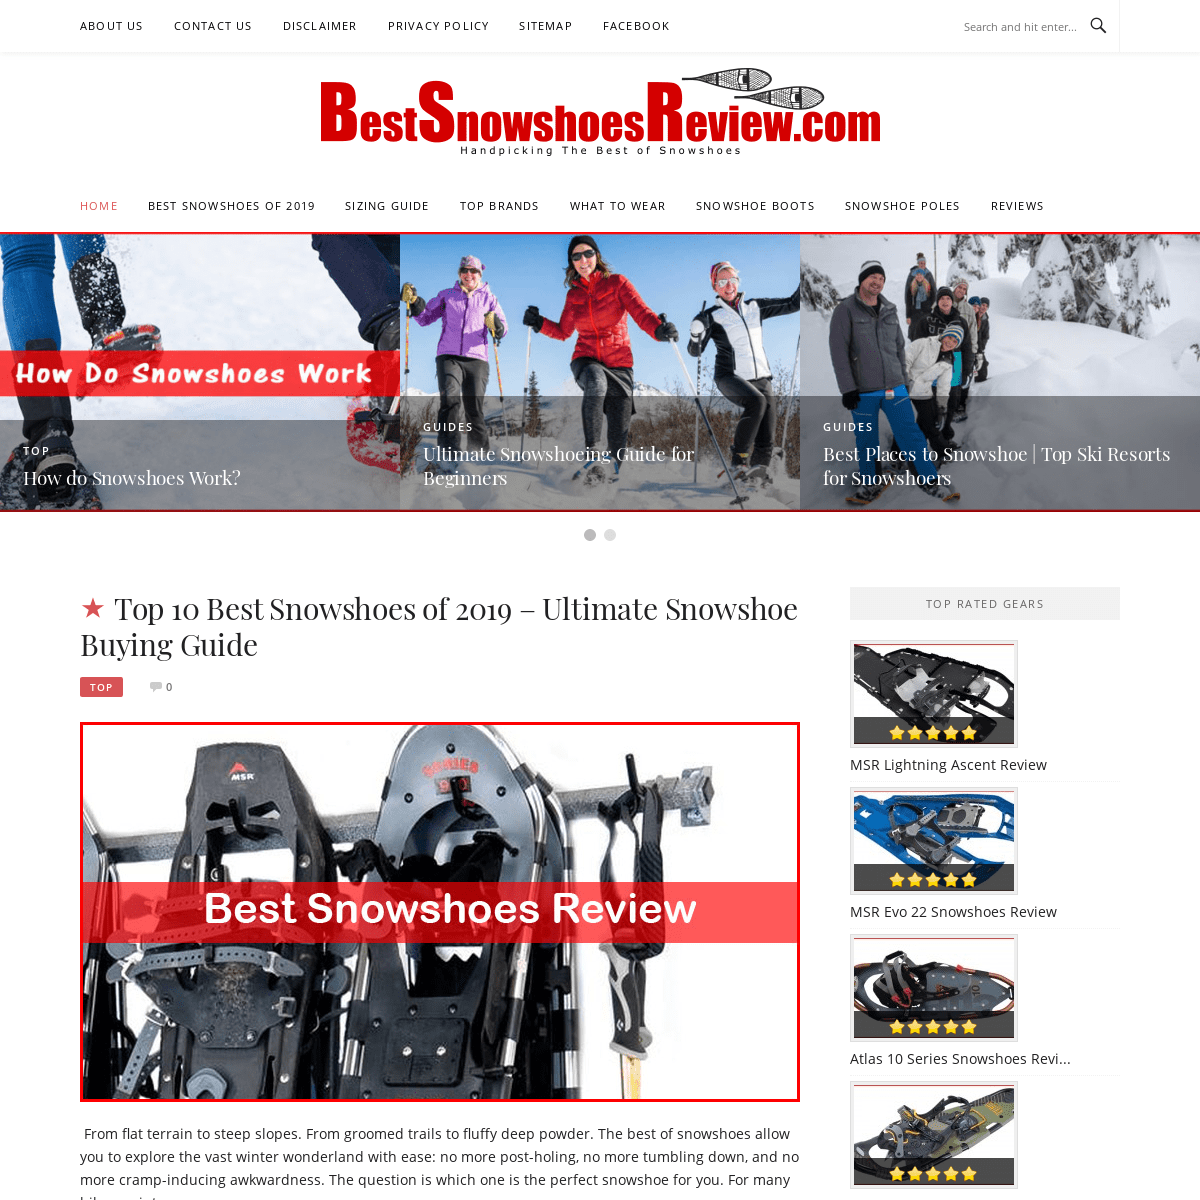 A complete backup of bestsnowshoesreview.com